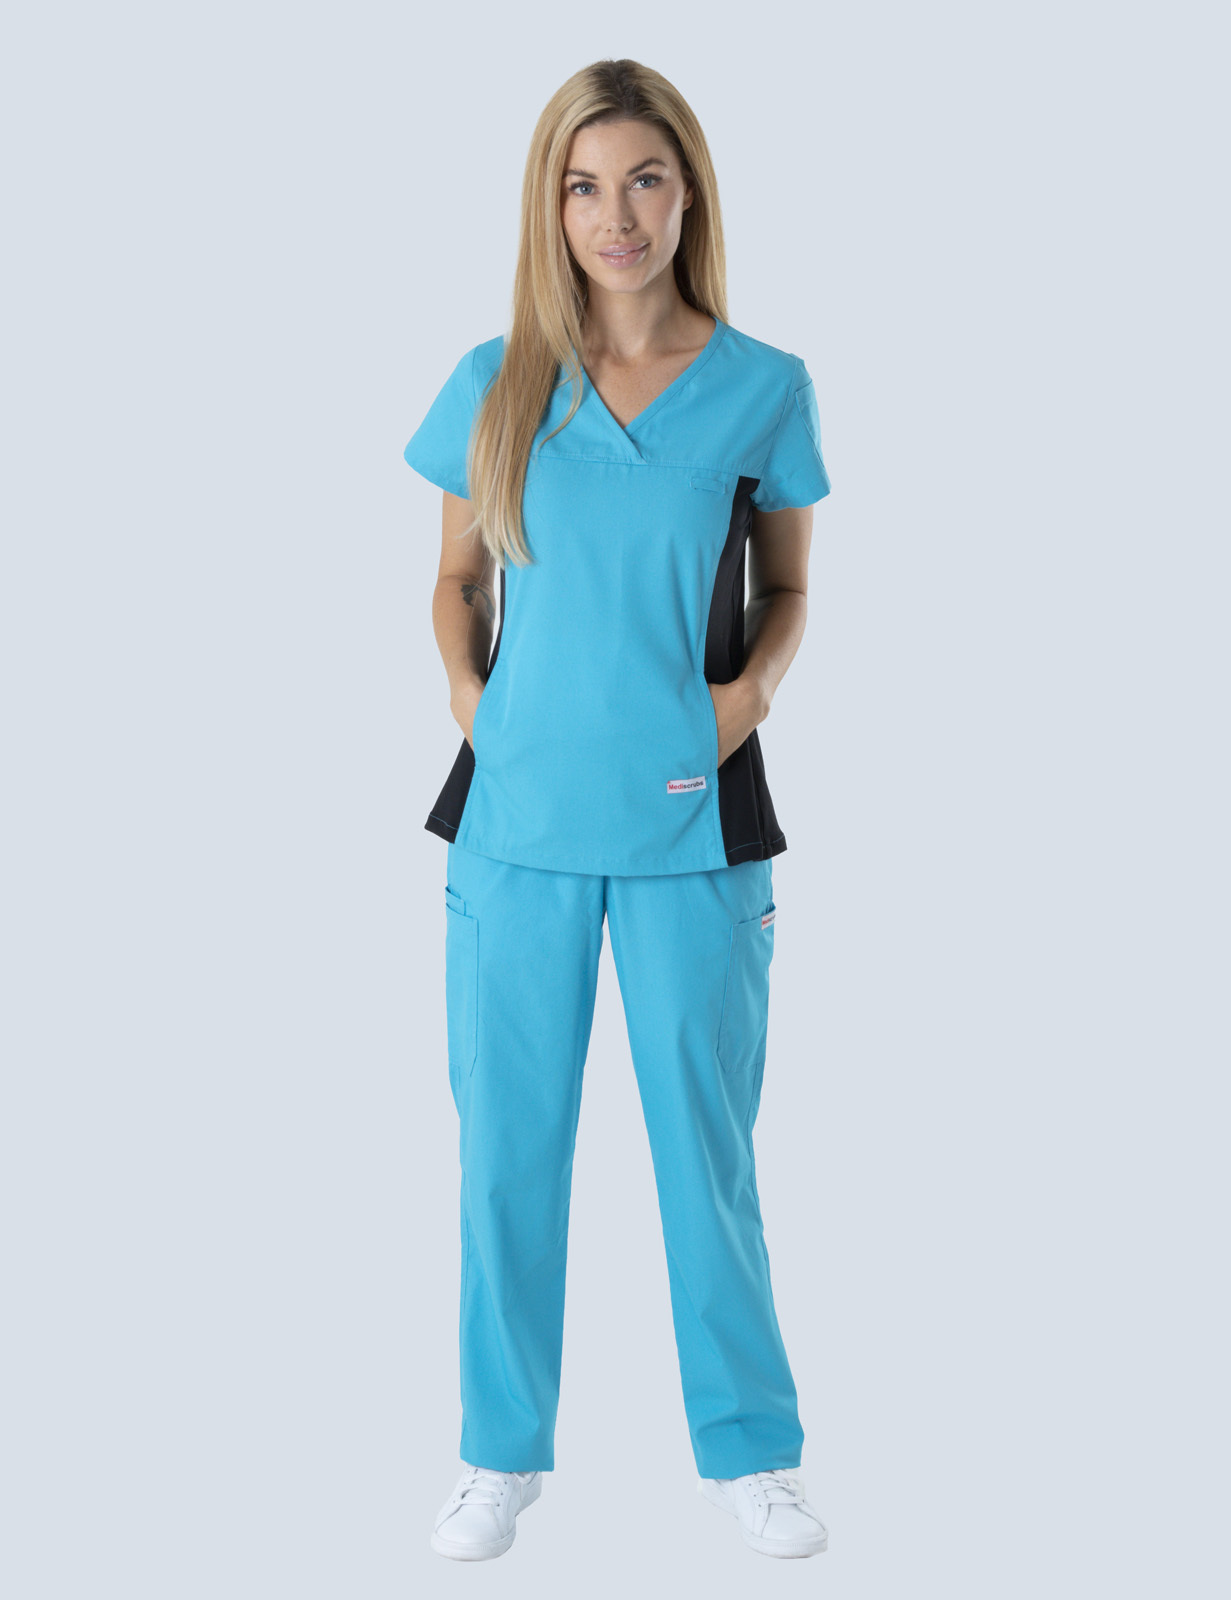 Women's Fit Solid Scrub Top With Spandex Panel - Aqua - 4X large - 0